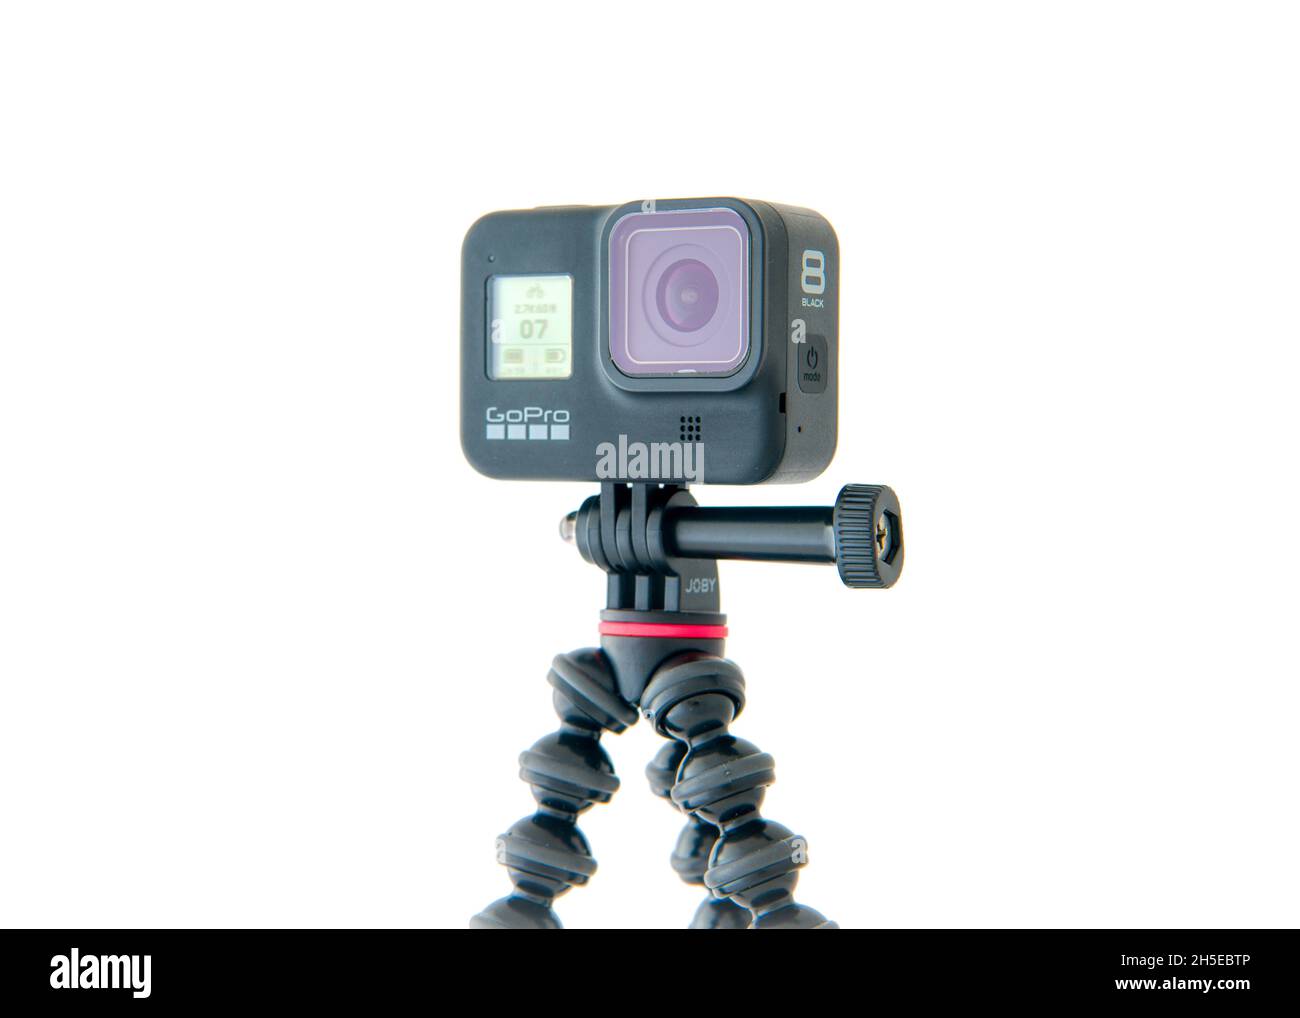 Chester, United Kingdom - 31st January 2021 : A GoPro Hero 8 Black action video camera mounted on a GorillaPod tripod from Joby Stock Photo